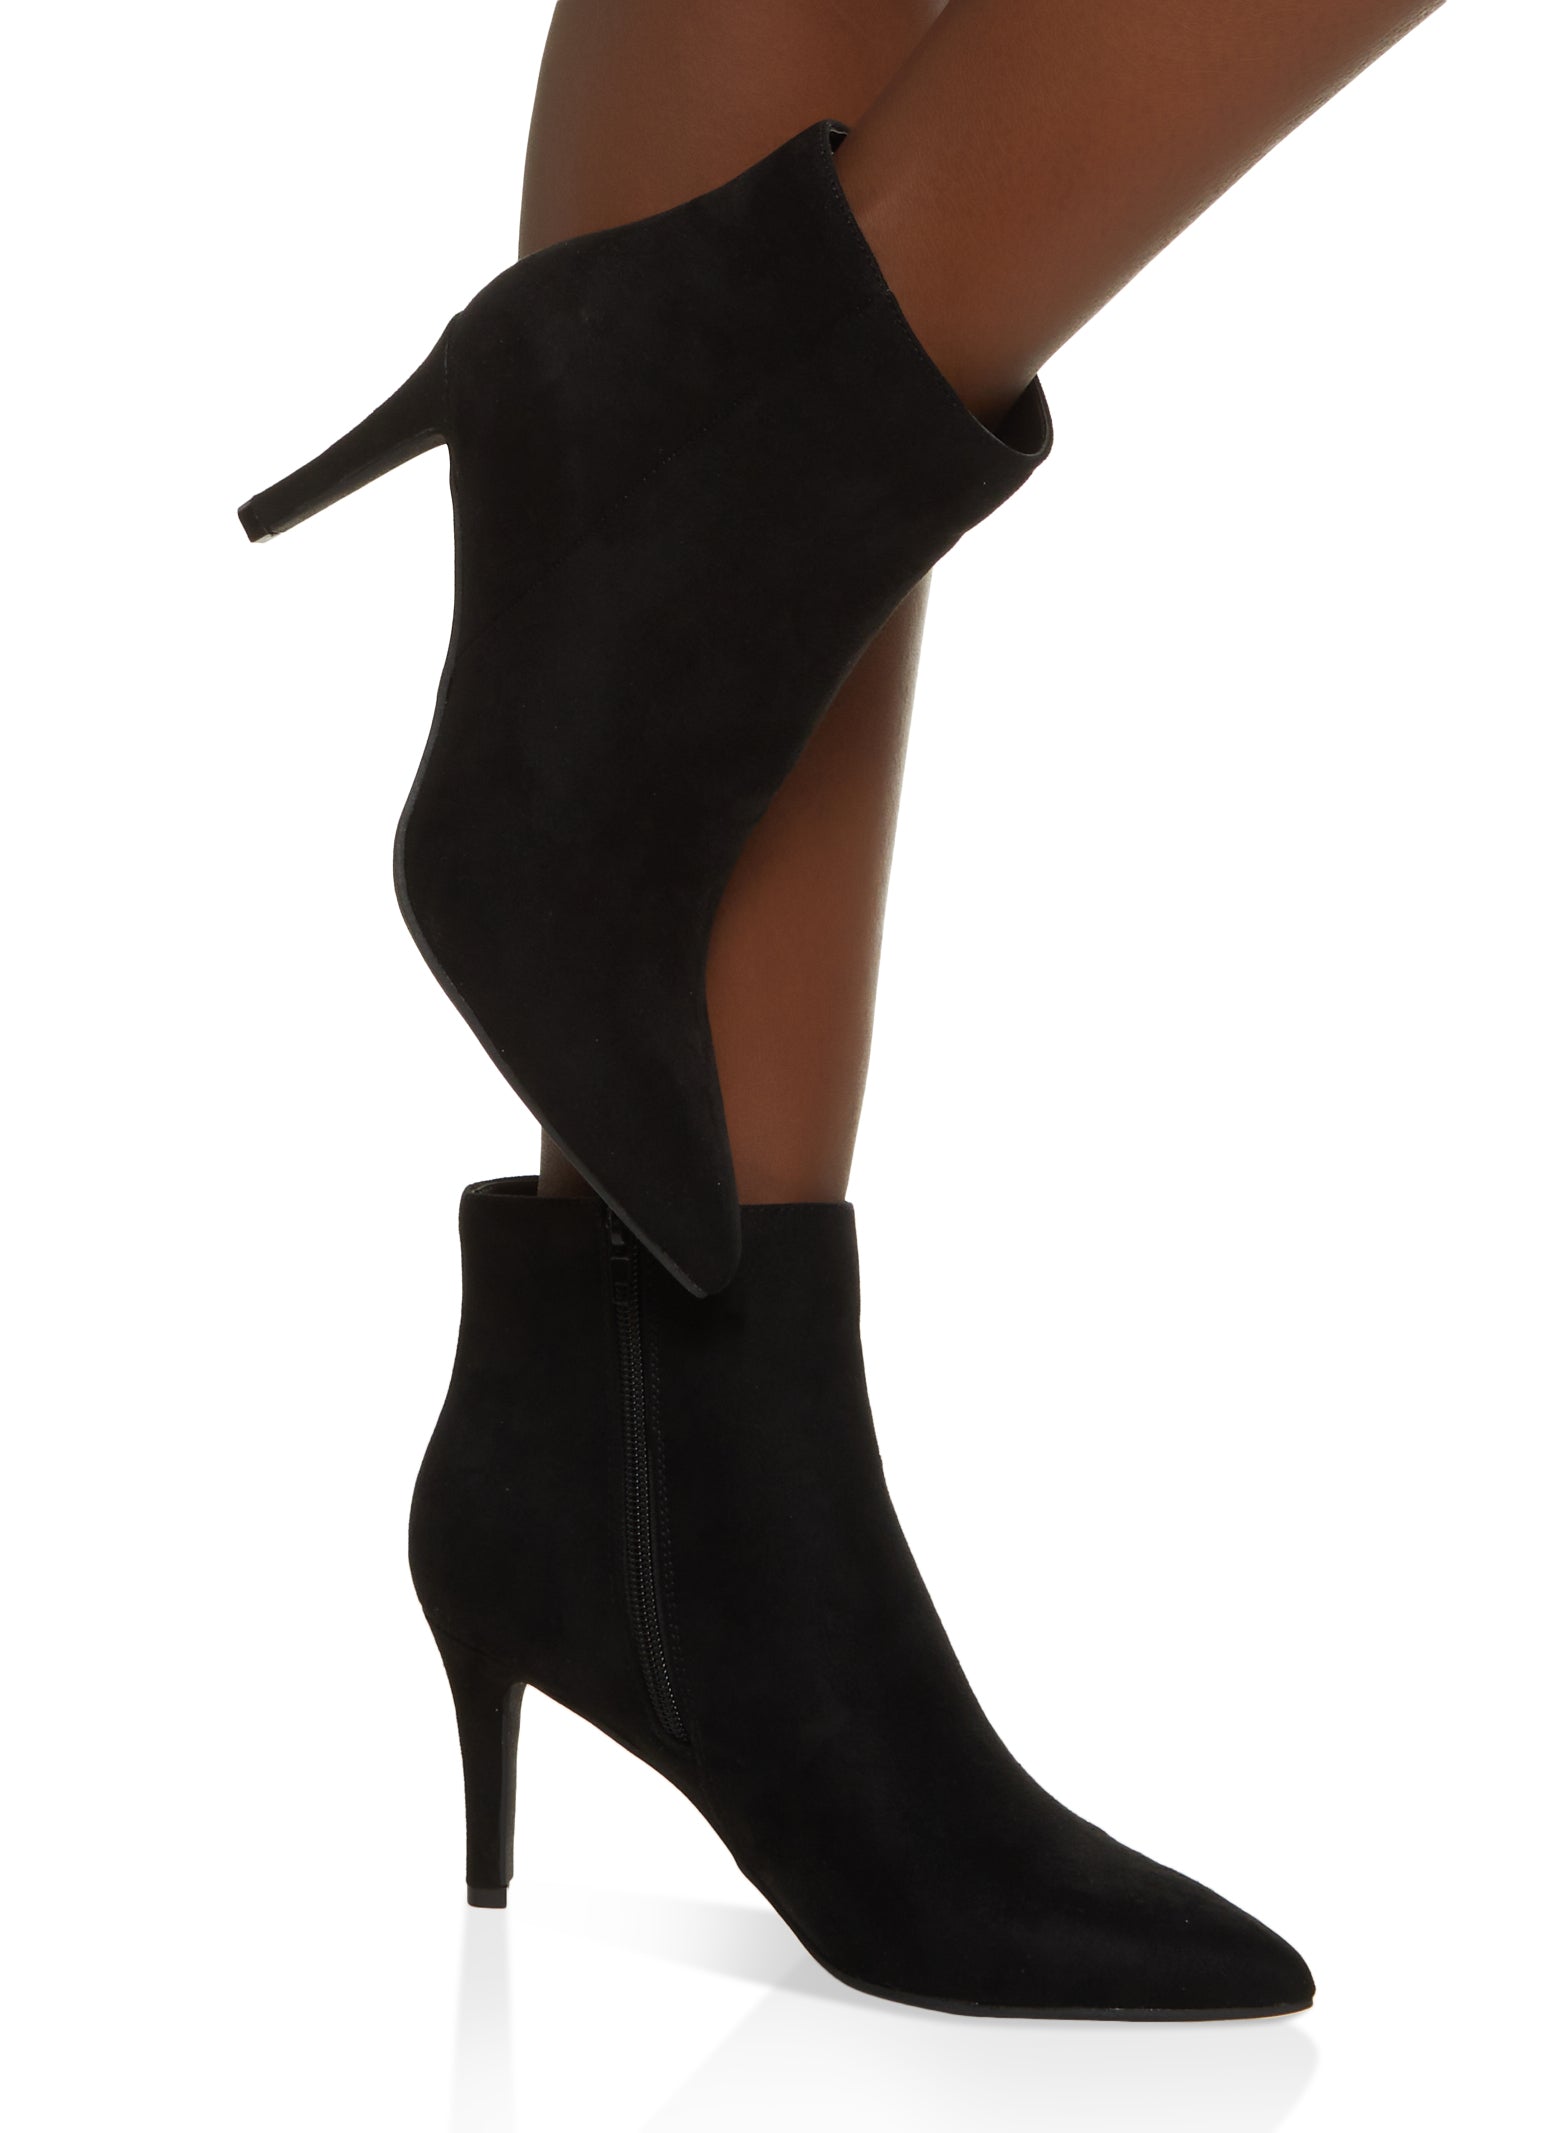 Womens Pointed Toe Side Zip Stiletto Booties, Black, Size 8